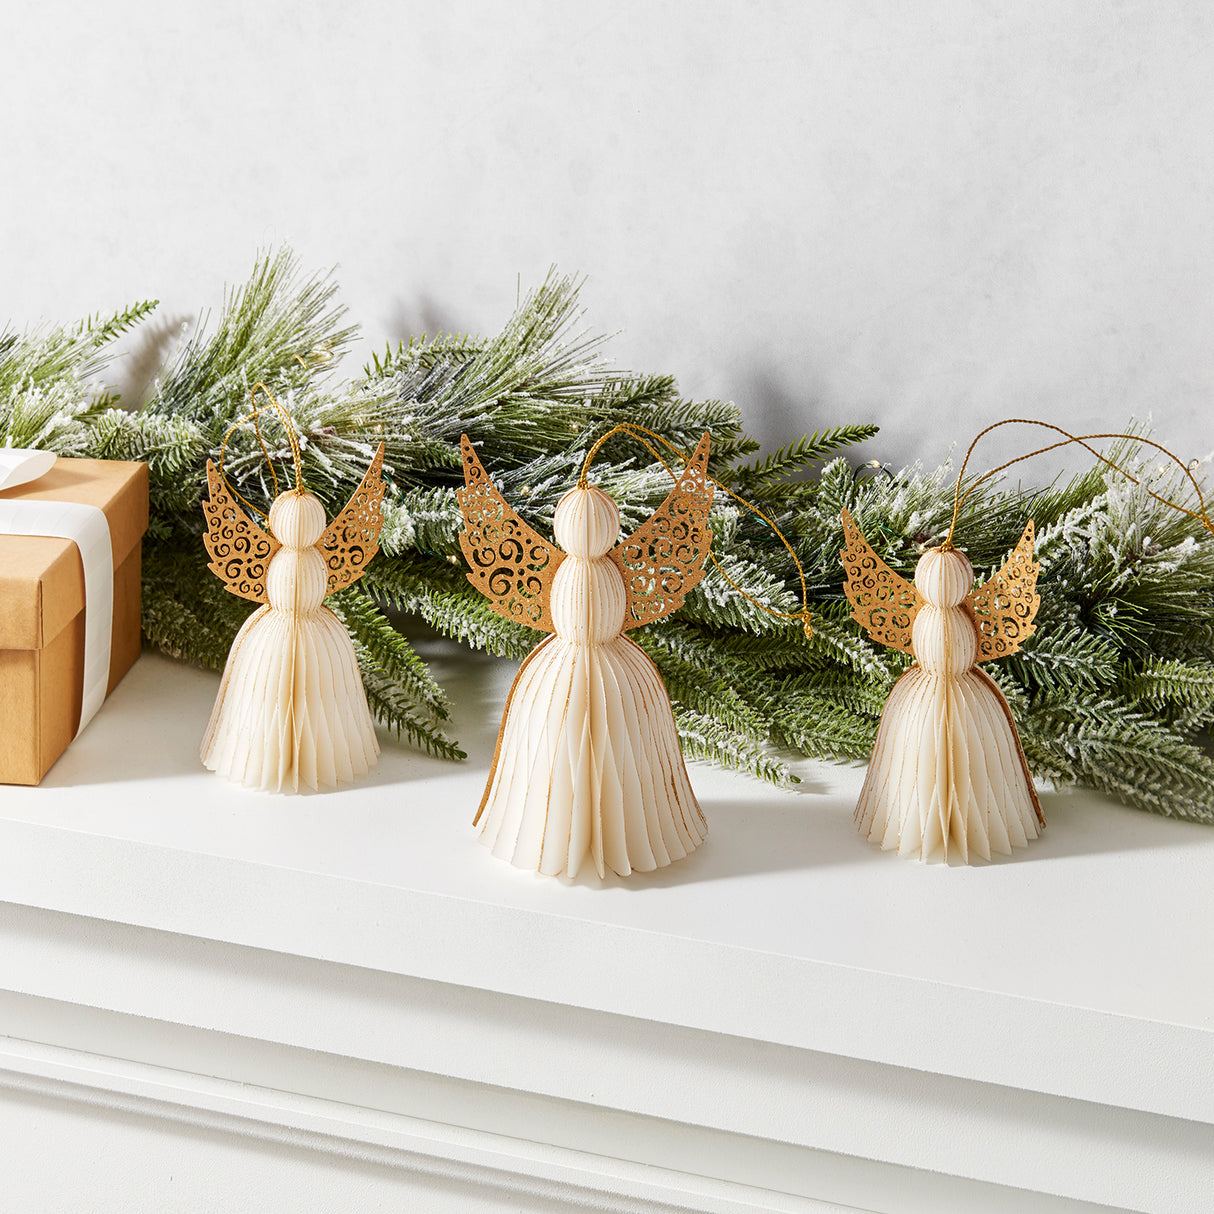 Pleated Paper Angel Ornaments, Set of 3